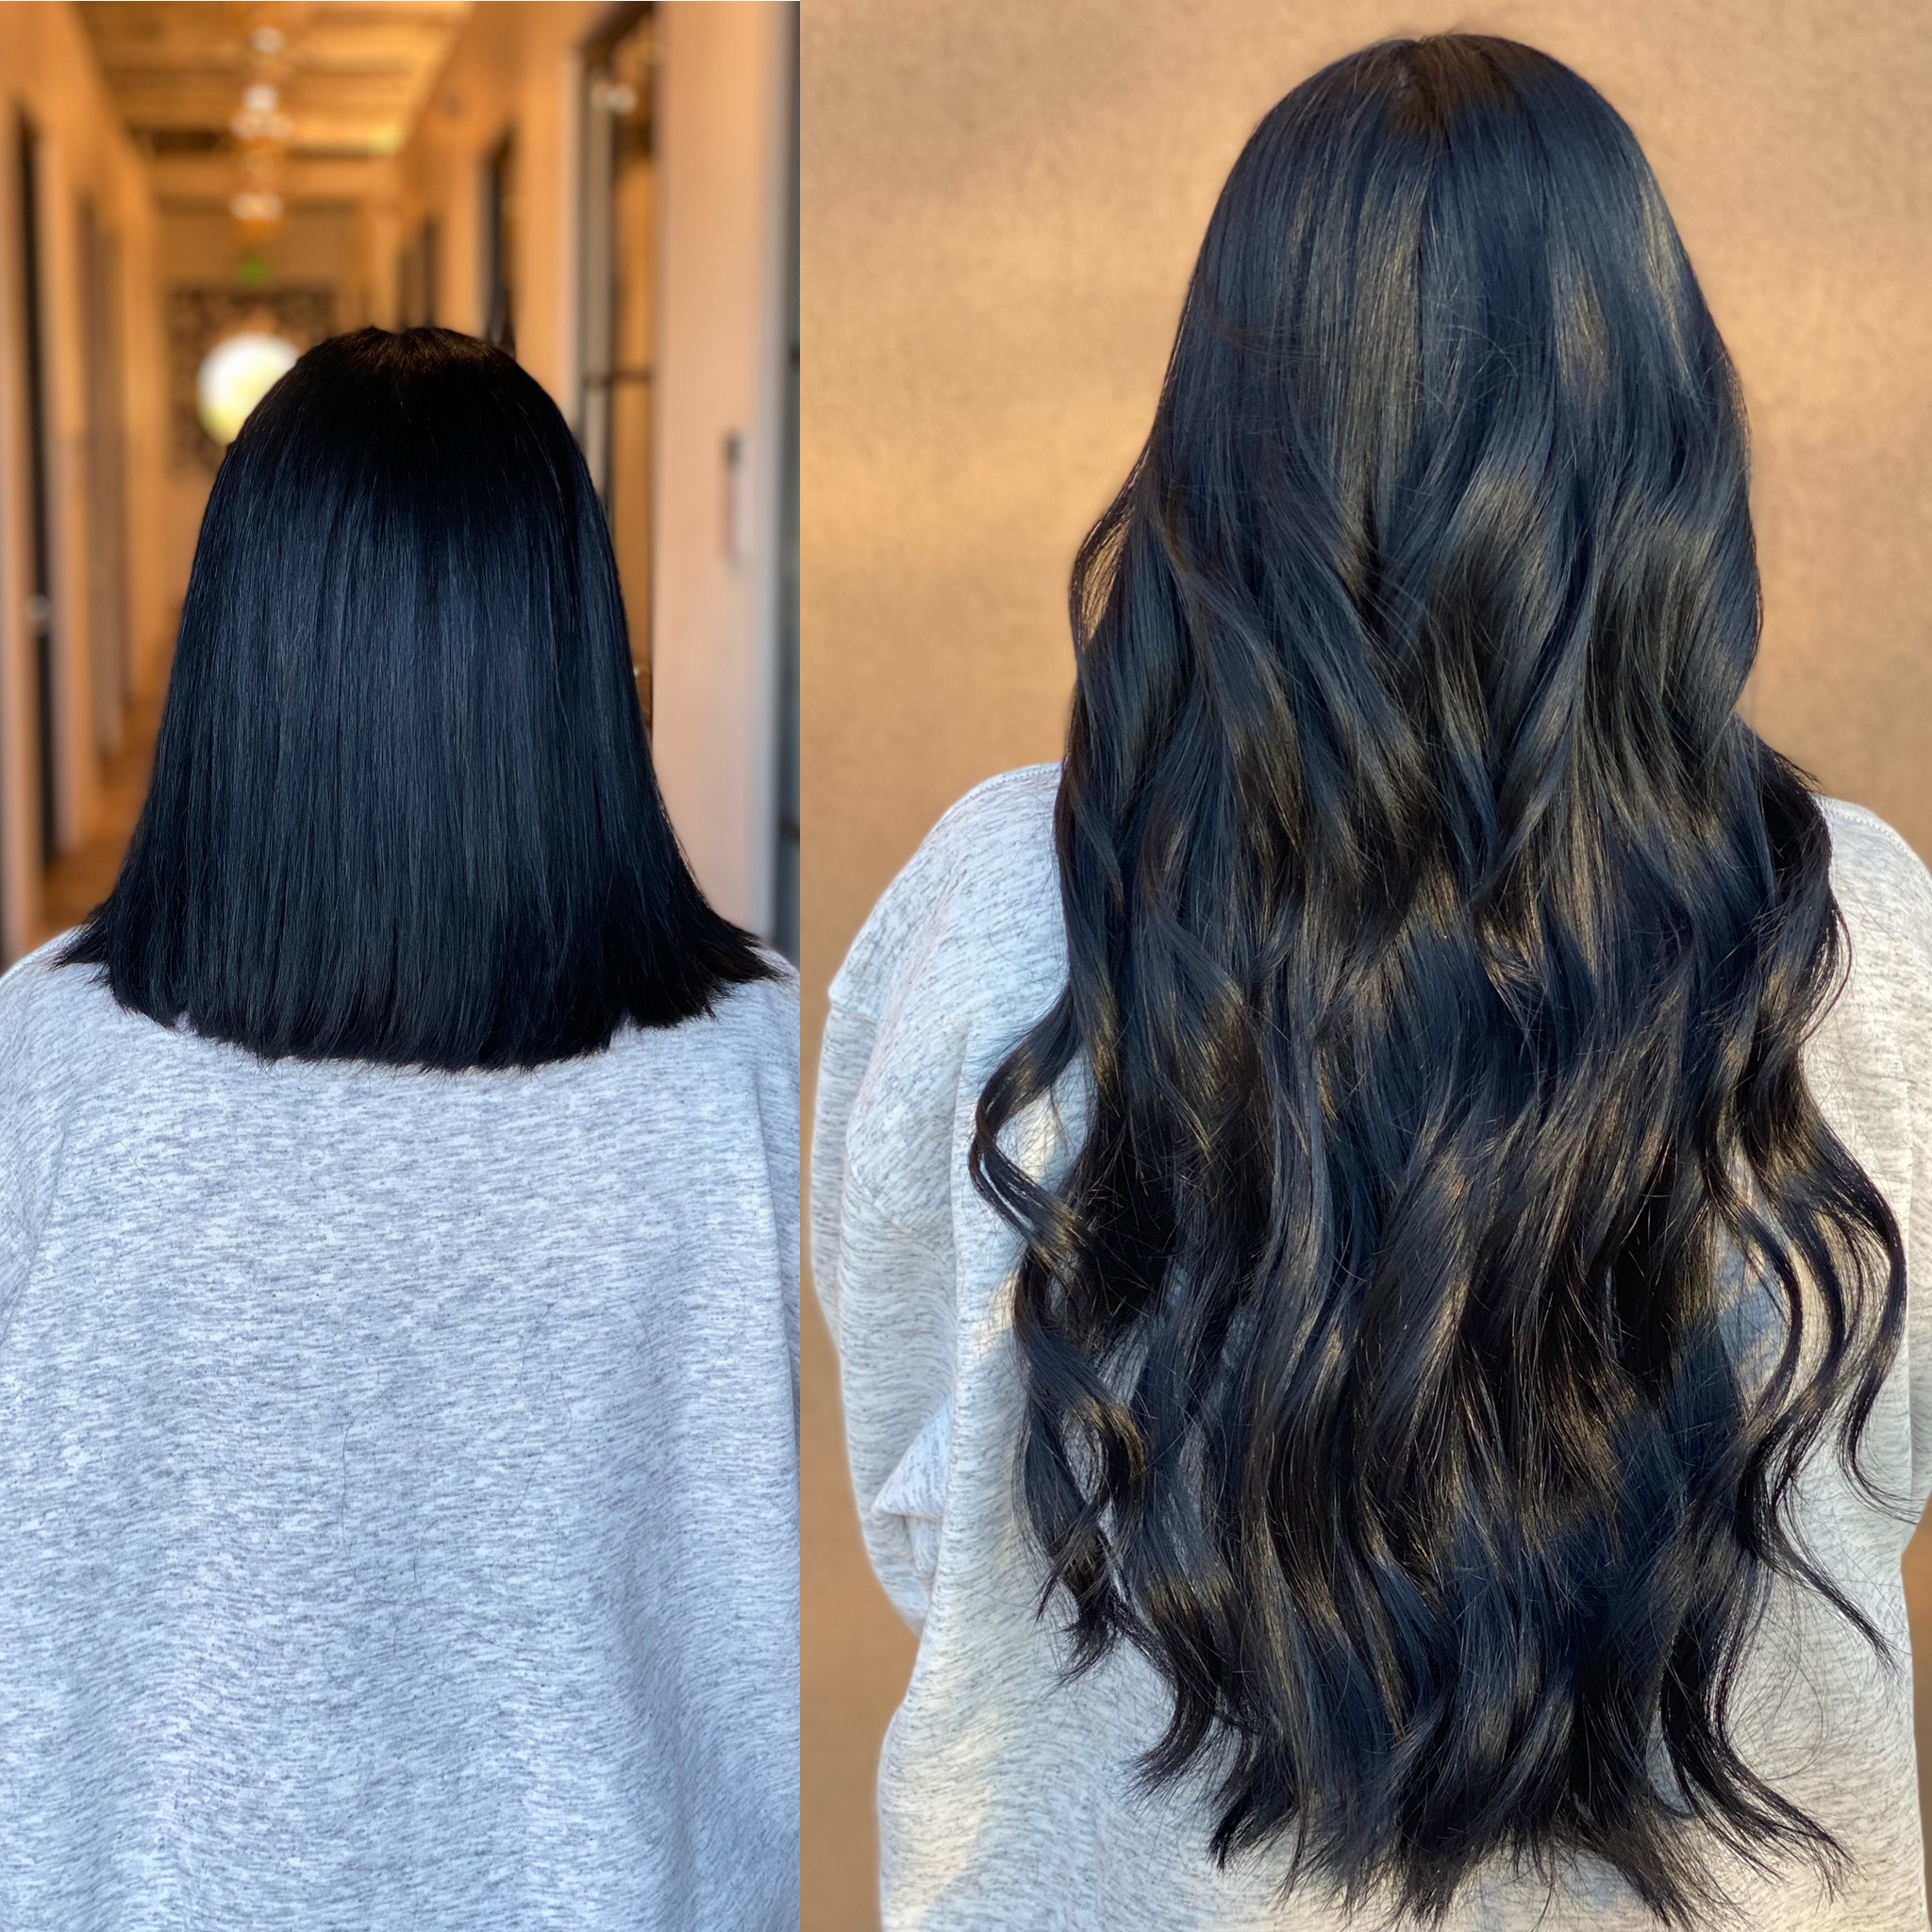 Great Lengths Hair Extensions Denver Before and After Pictures